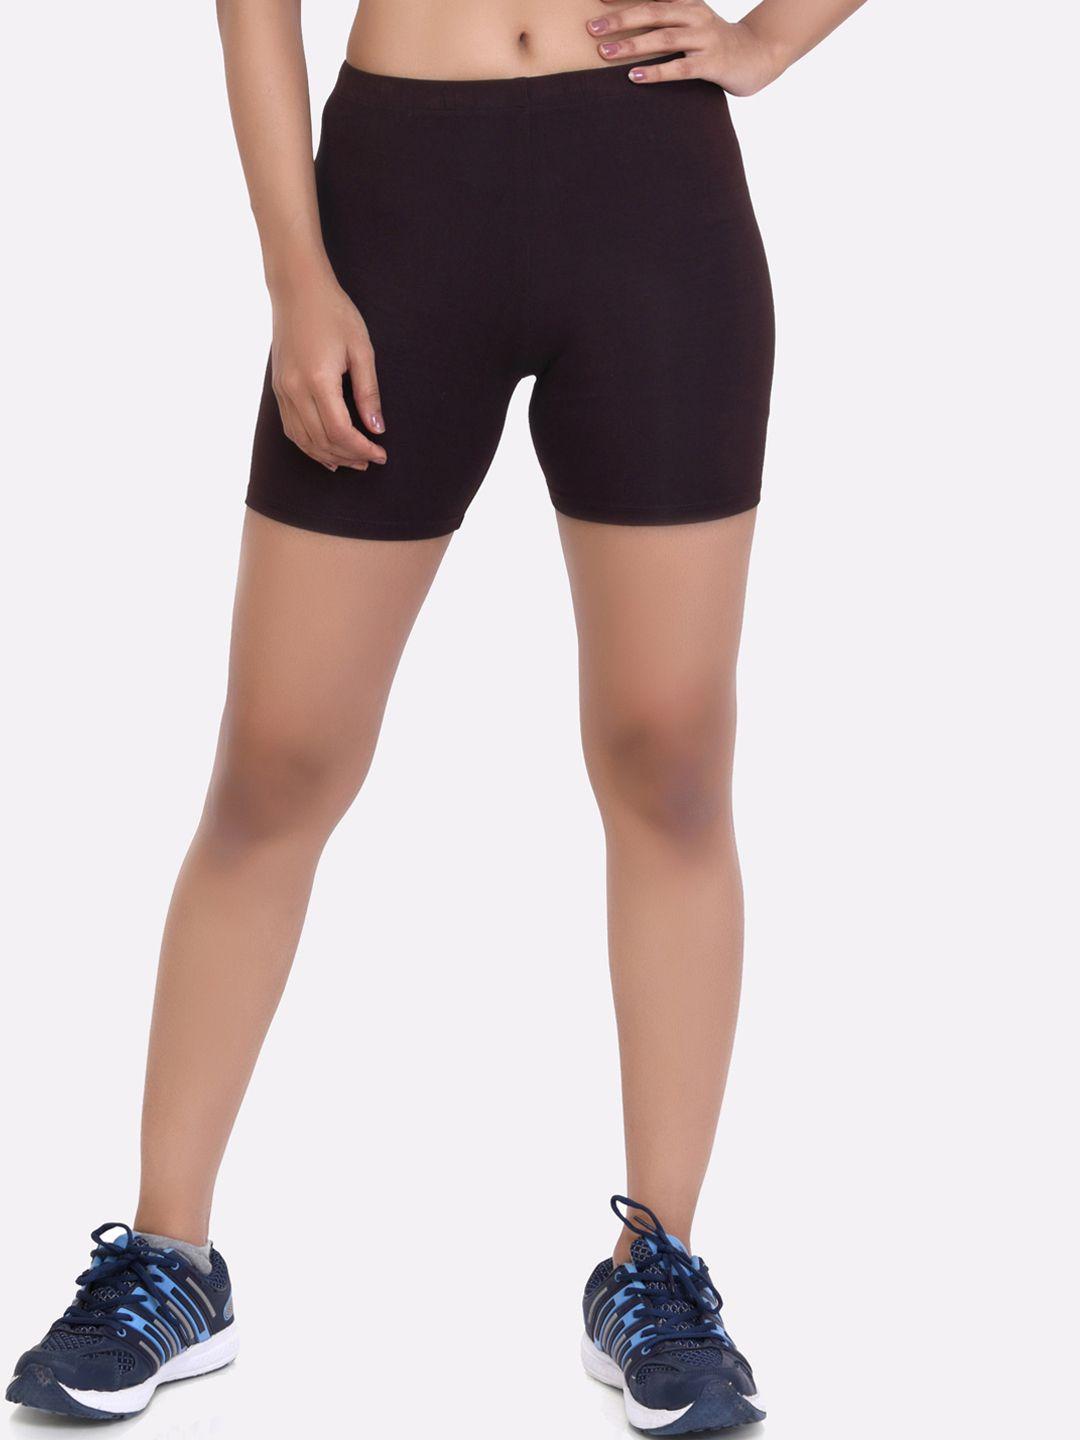 laasa-sports-women-brown-skinny-fit-training-or-gym-sports-shorts